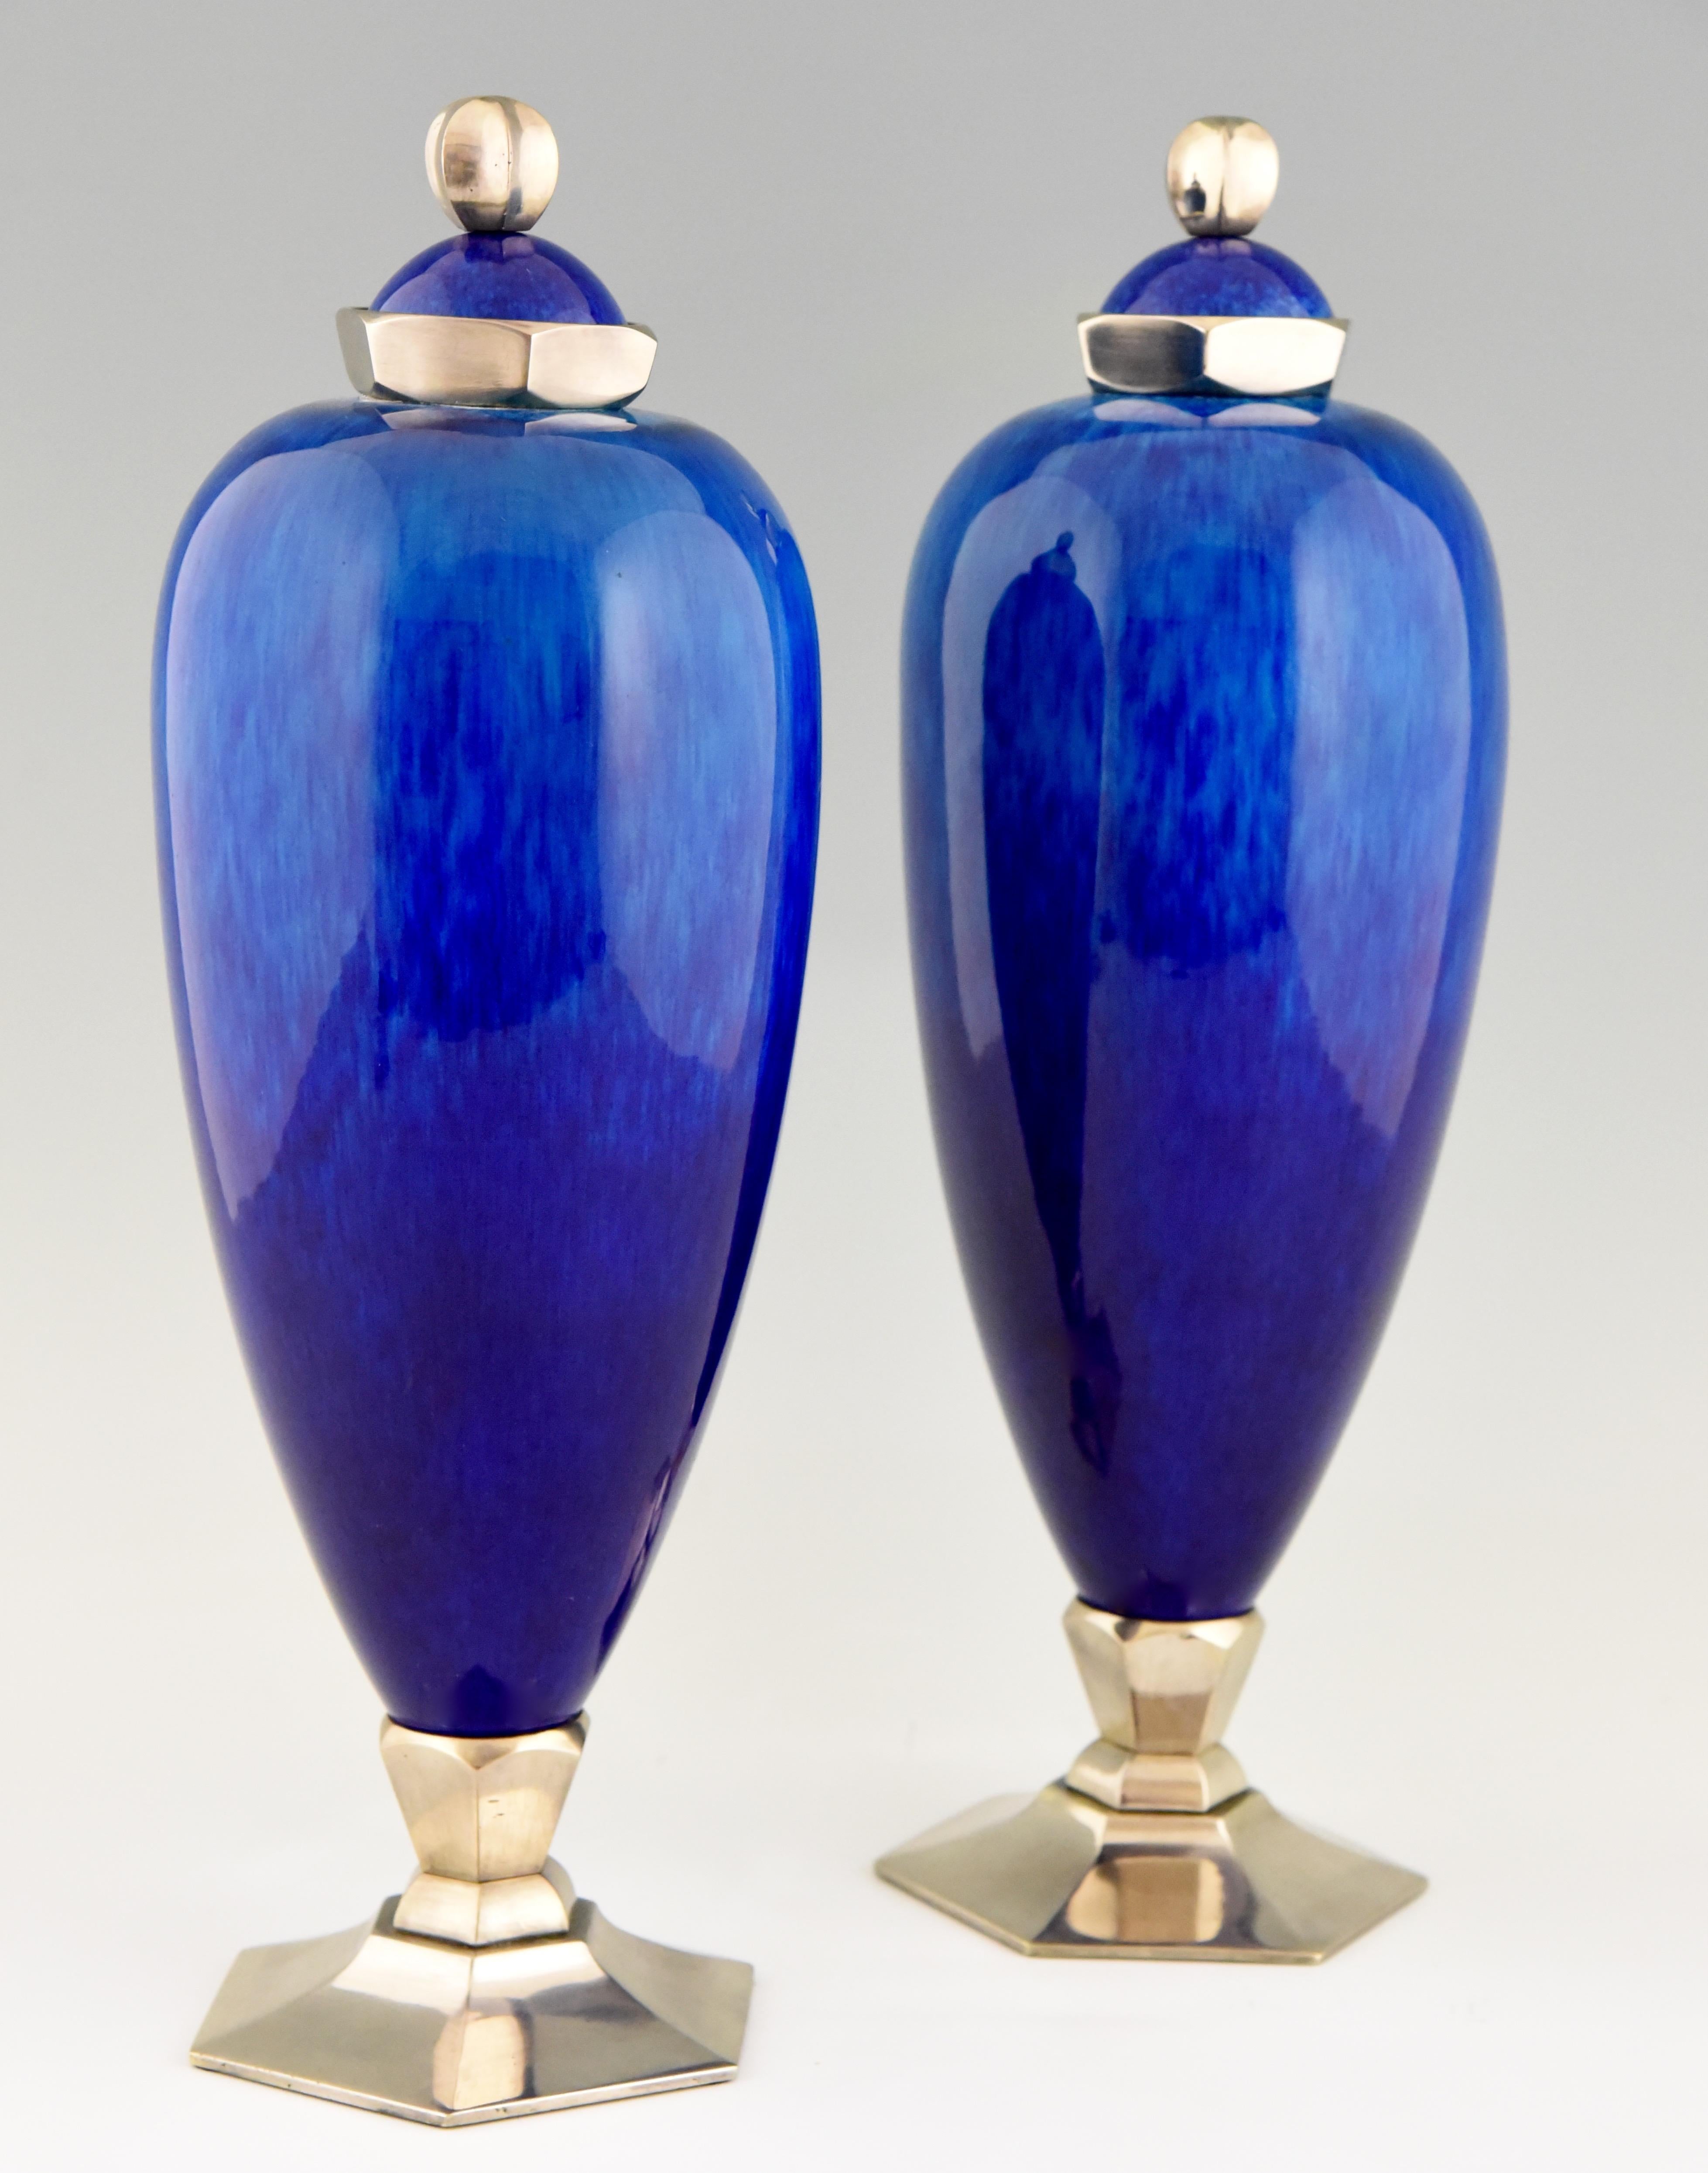 Elegant pair of blue Art Deco ceramic vases or urns by Paul Milet for Sèvres.
The vases have bronze decorations with a silver patina. They are signed with the artists initials and marked Sèvres. Created in France, circa 1925.